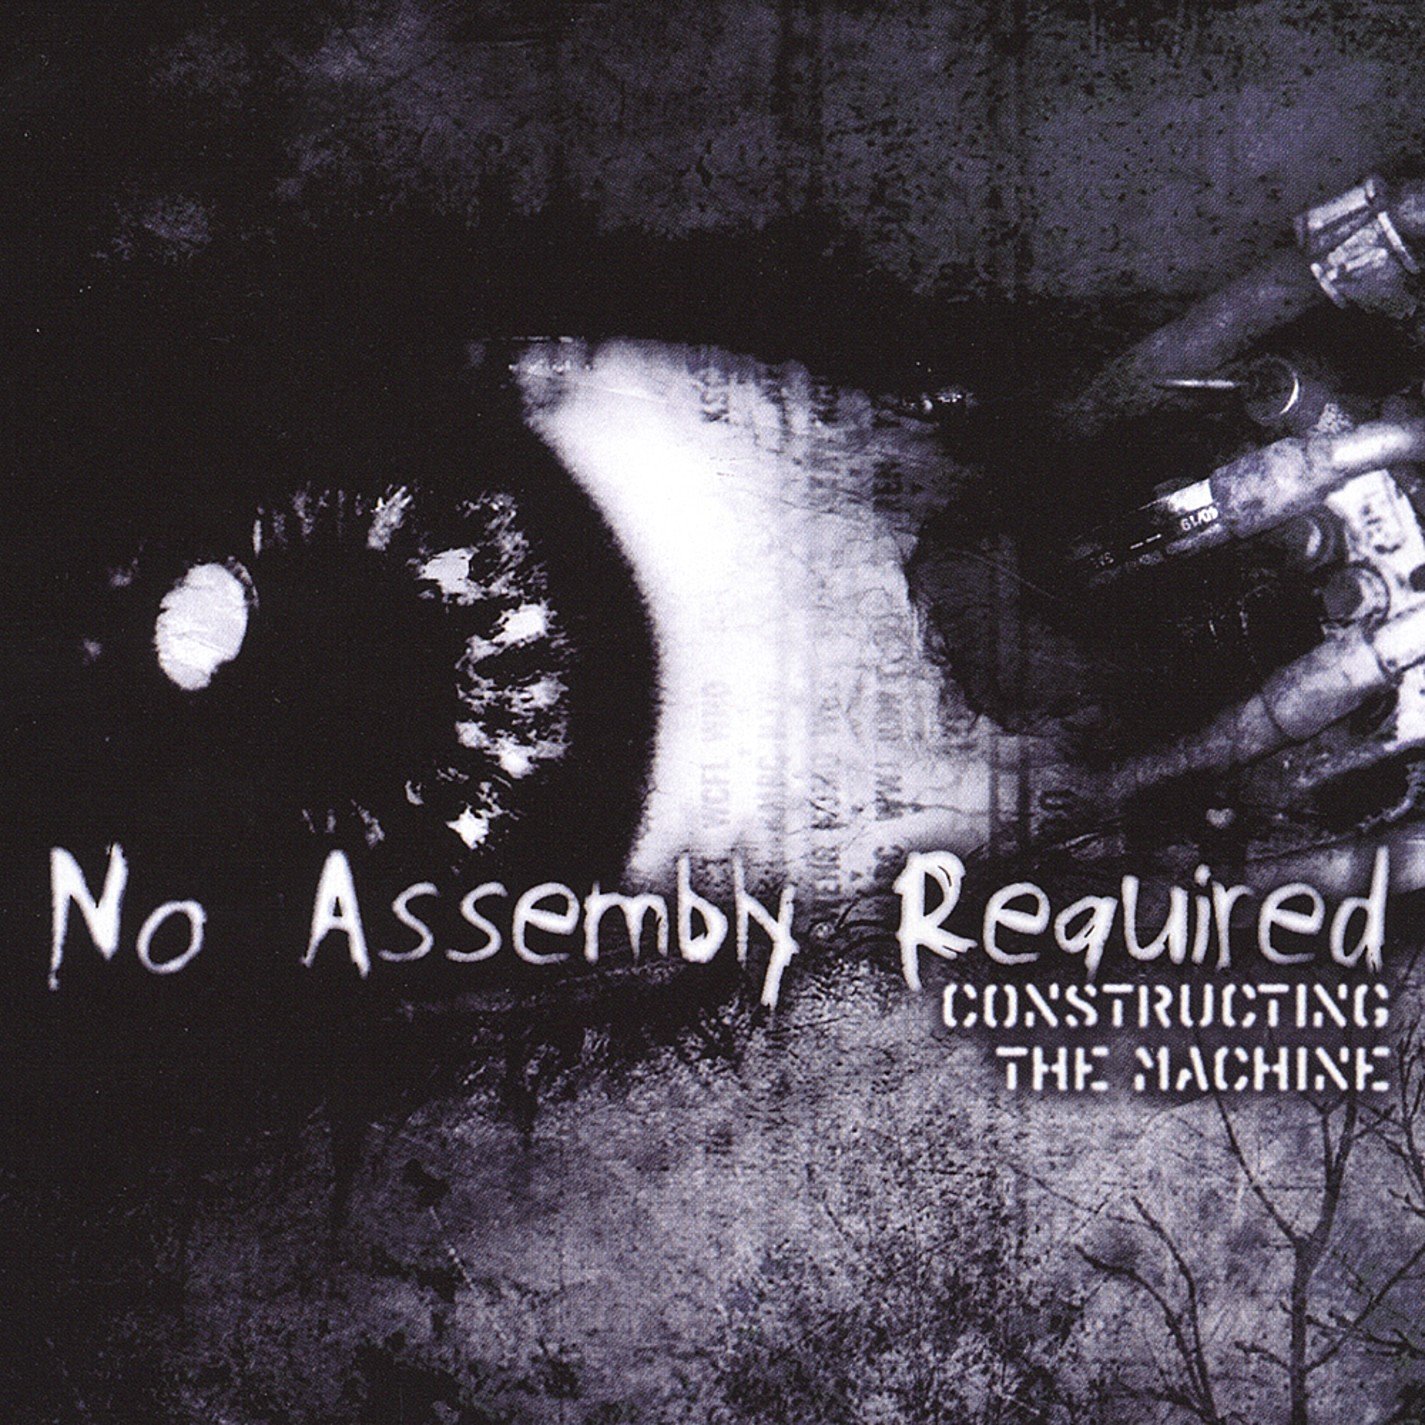 Assembly required. 2003 - The Mass. The Dying Breed my World down. Love like Machines the Heavy Eyes Cover.